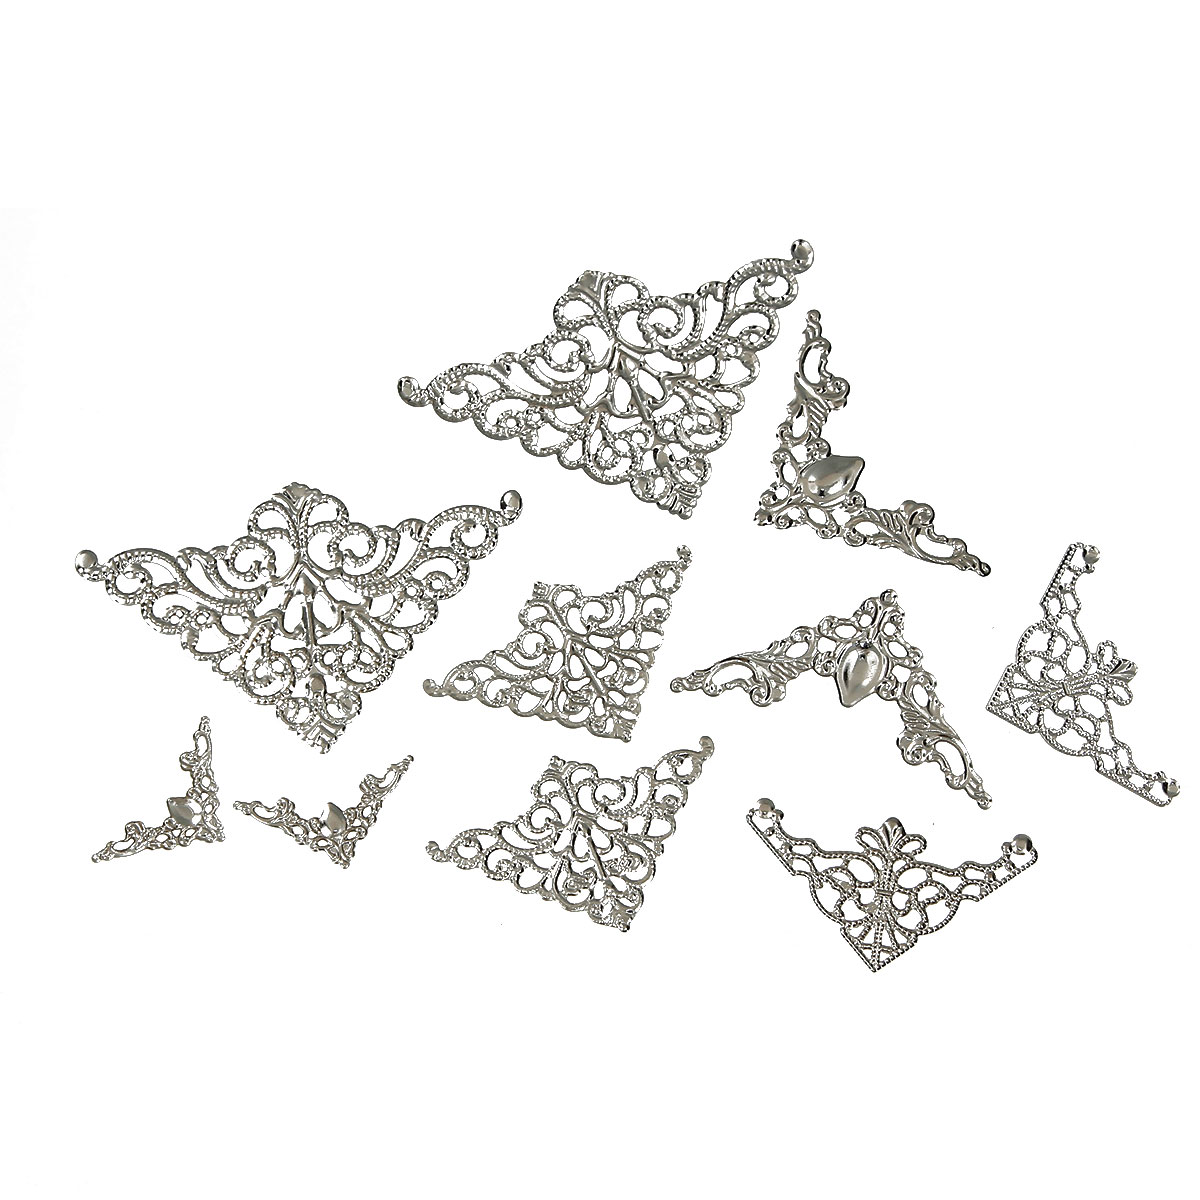 Picture of Zinc Based Alloy & Iron Based Alloy Filigree Stamping Embellishments Findings Fixed Triangle Silver Tone Flower Vine Carved Hollow 75mm x48mm(3" x1 7/8") - 22mm x22mm( 7/8" x 7/8"), 50 PCs